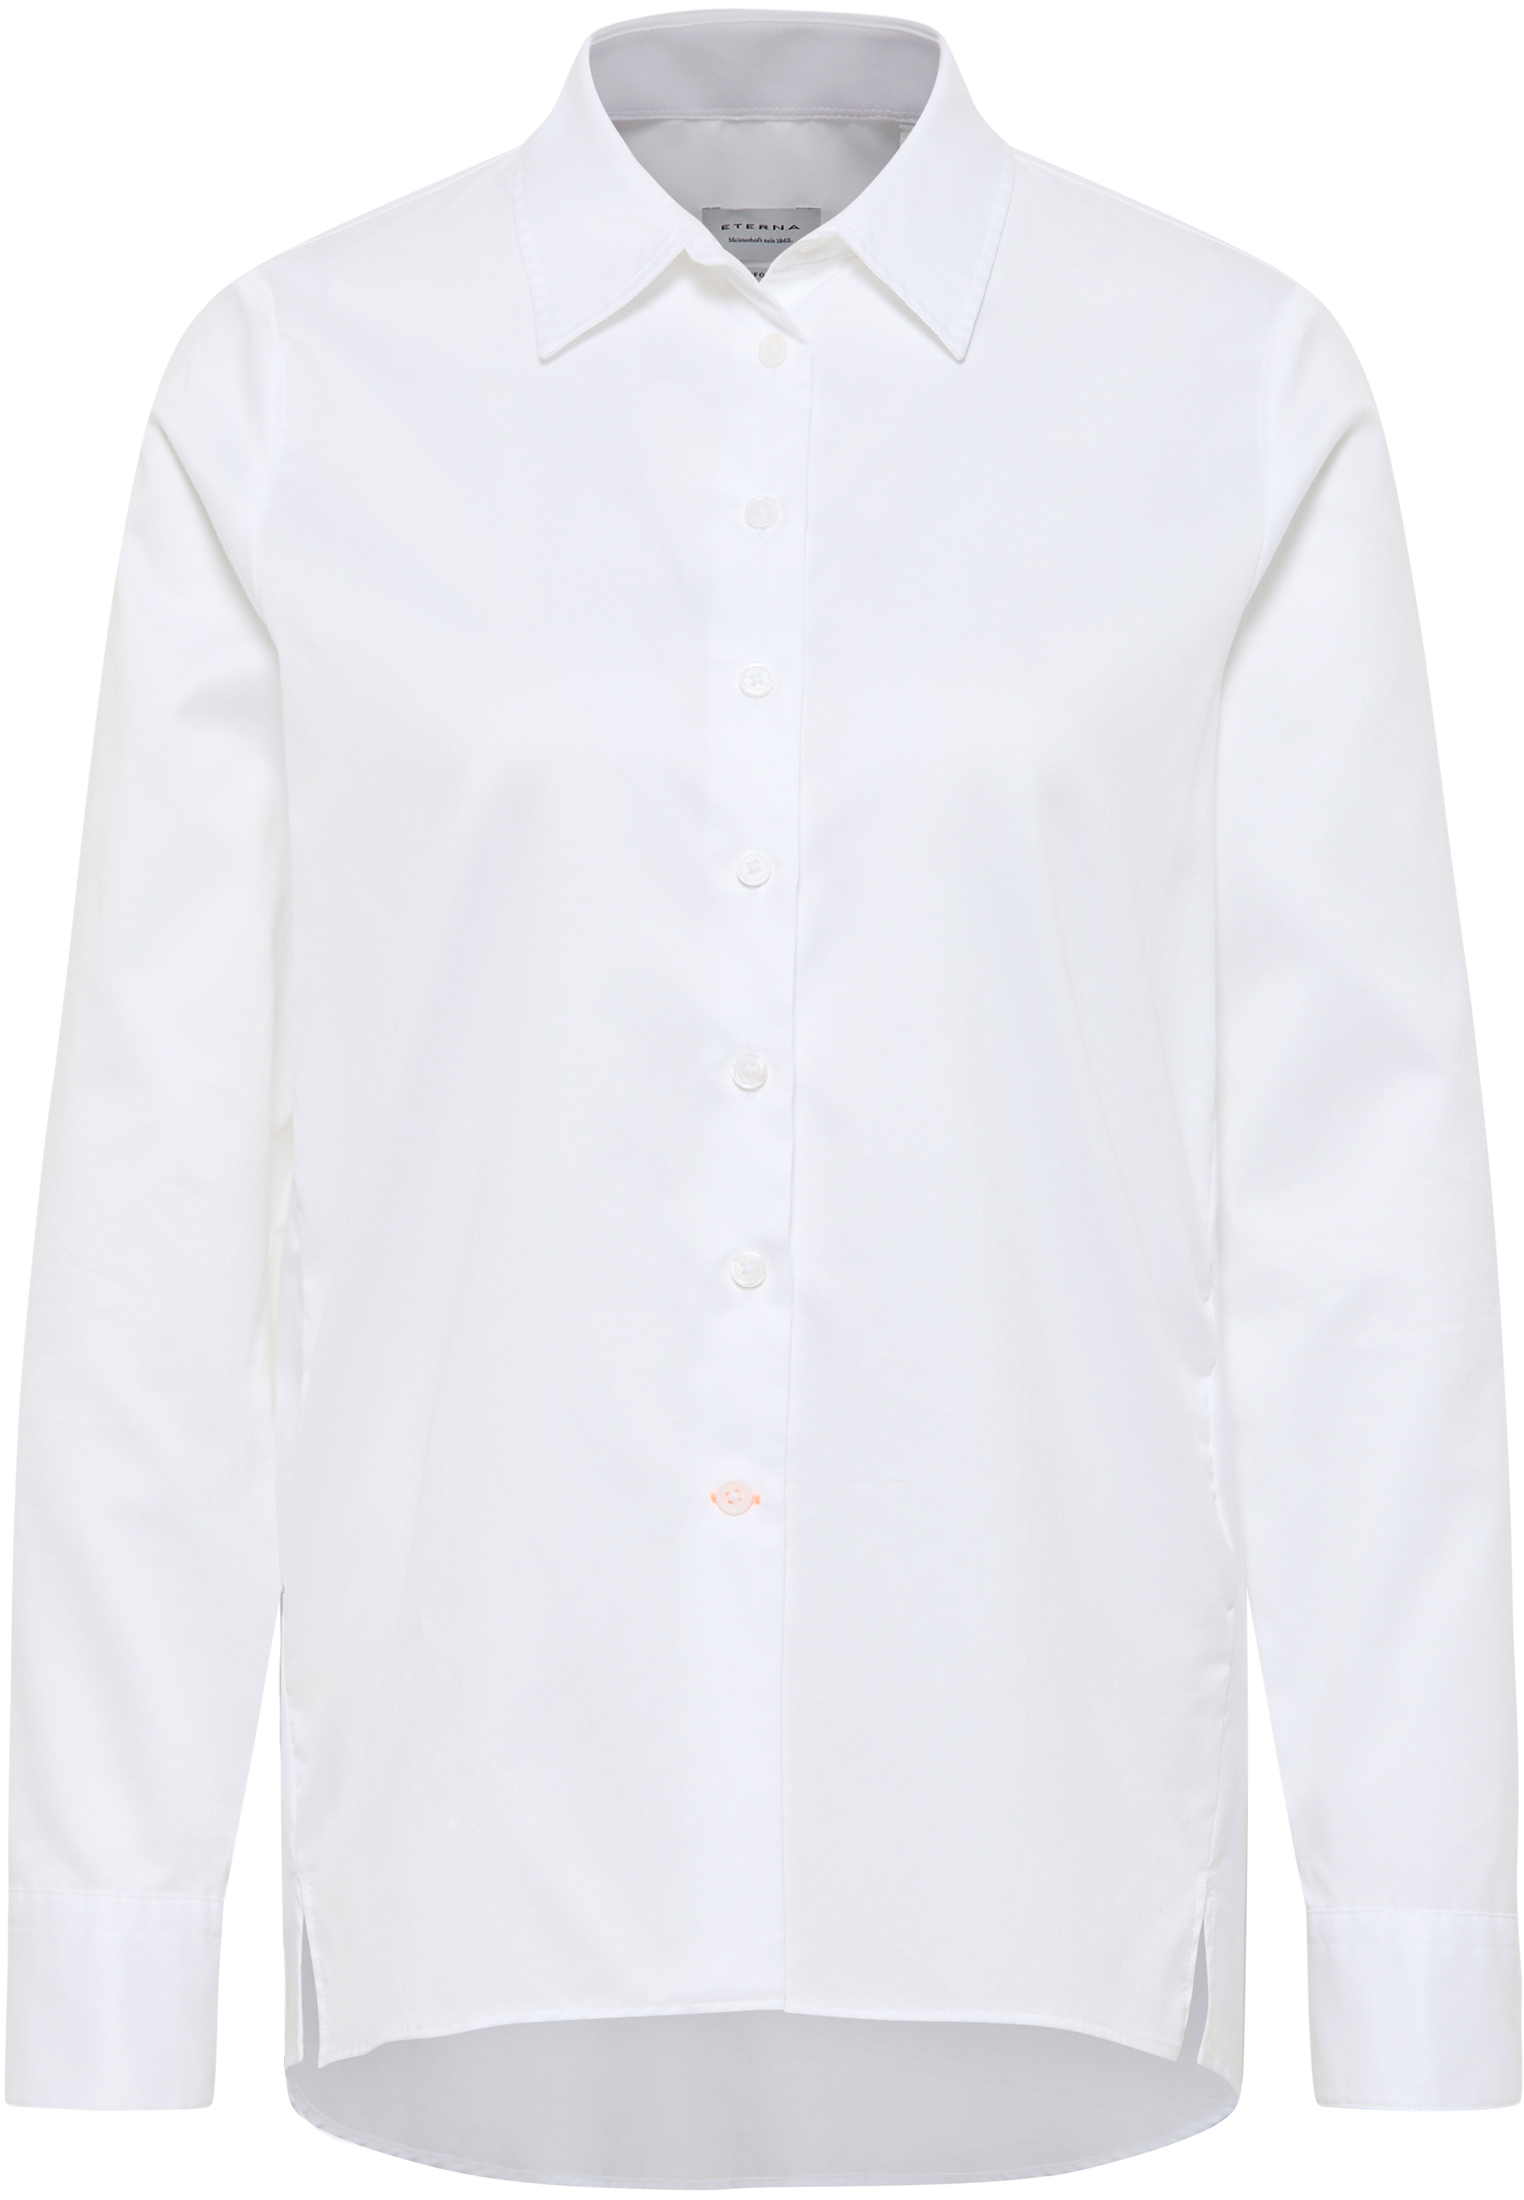 unifarben | Bluse | | | in 2BL00664-00-02-34-1/1 34 Soft off-white off-white Shirt Luxury Langarm